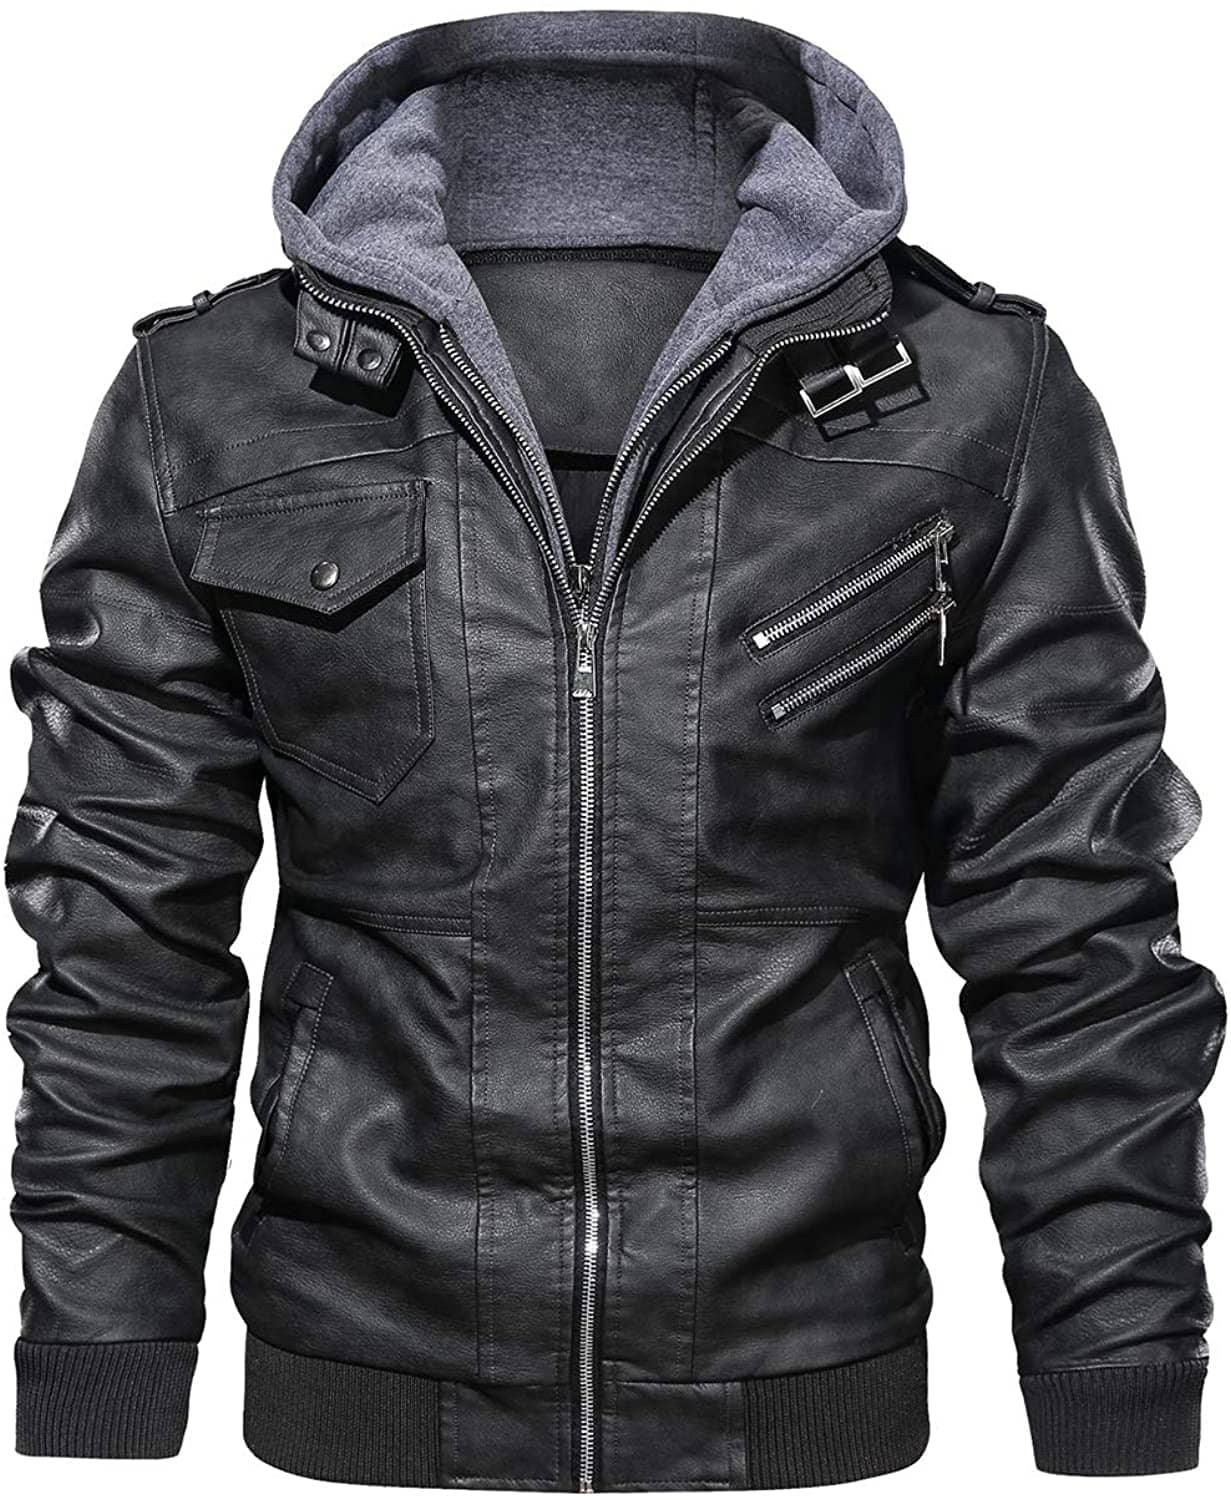 Men's Leather Jacket with Vintage Removable Hooded Faux Leather Bomber Jacket